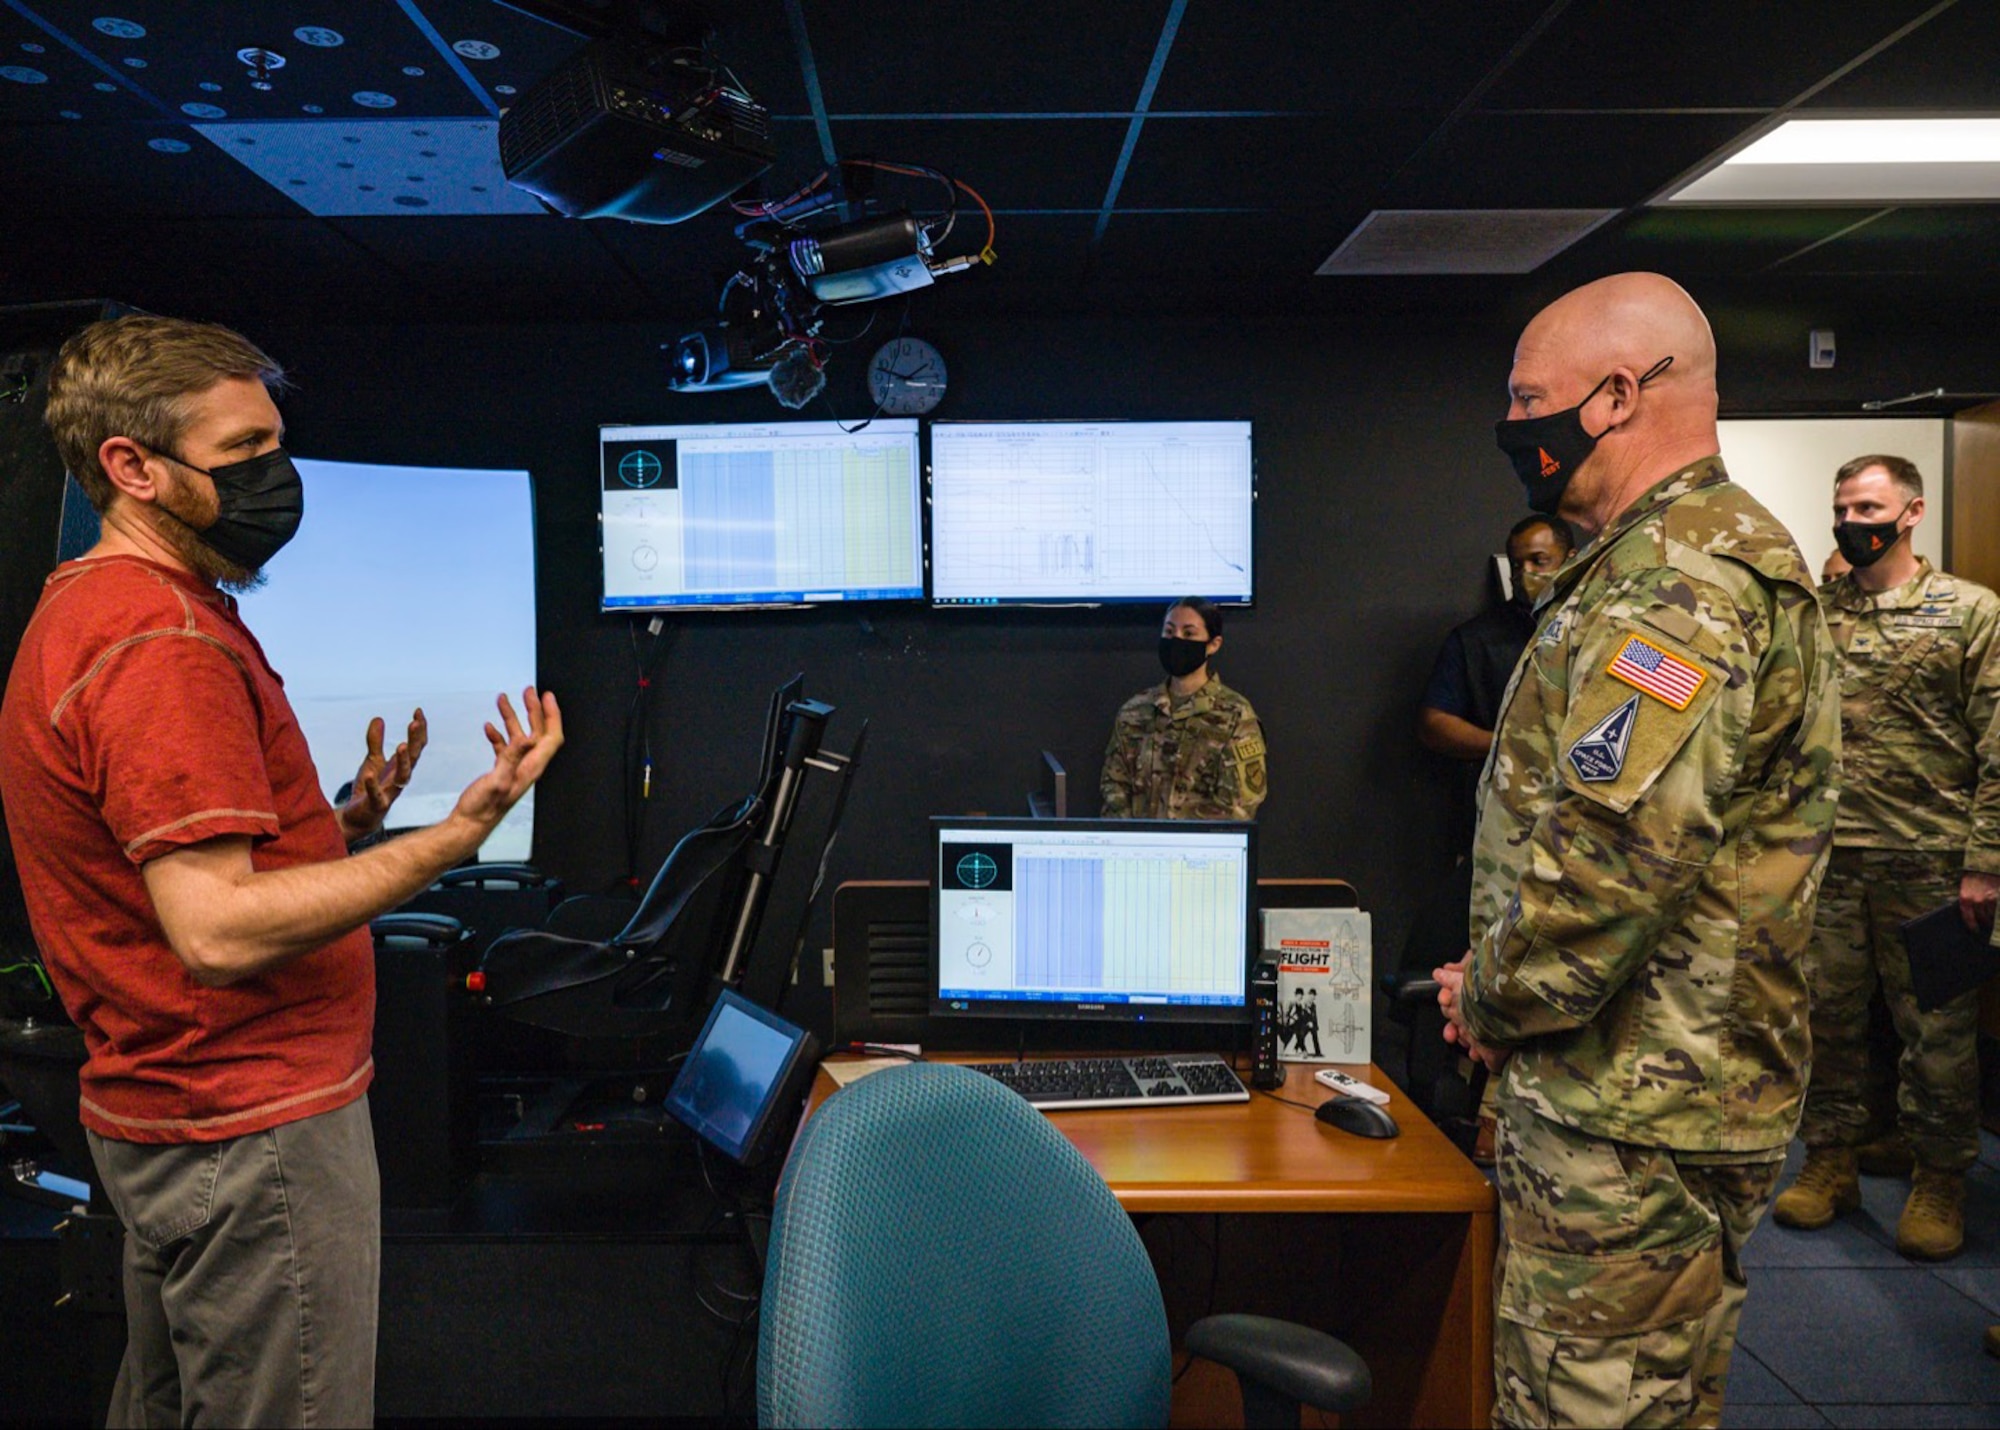 United States Space Force Gen. John W. “Jay” Raymond, Chief of Space Operations, receives a tour of a flight simulator at the Air Force Test Pilot School at Edwards Air Force Base, California, April 6. (Air Force photo by Giancarlo Casem)